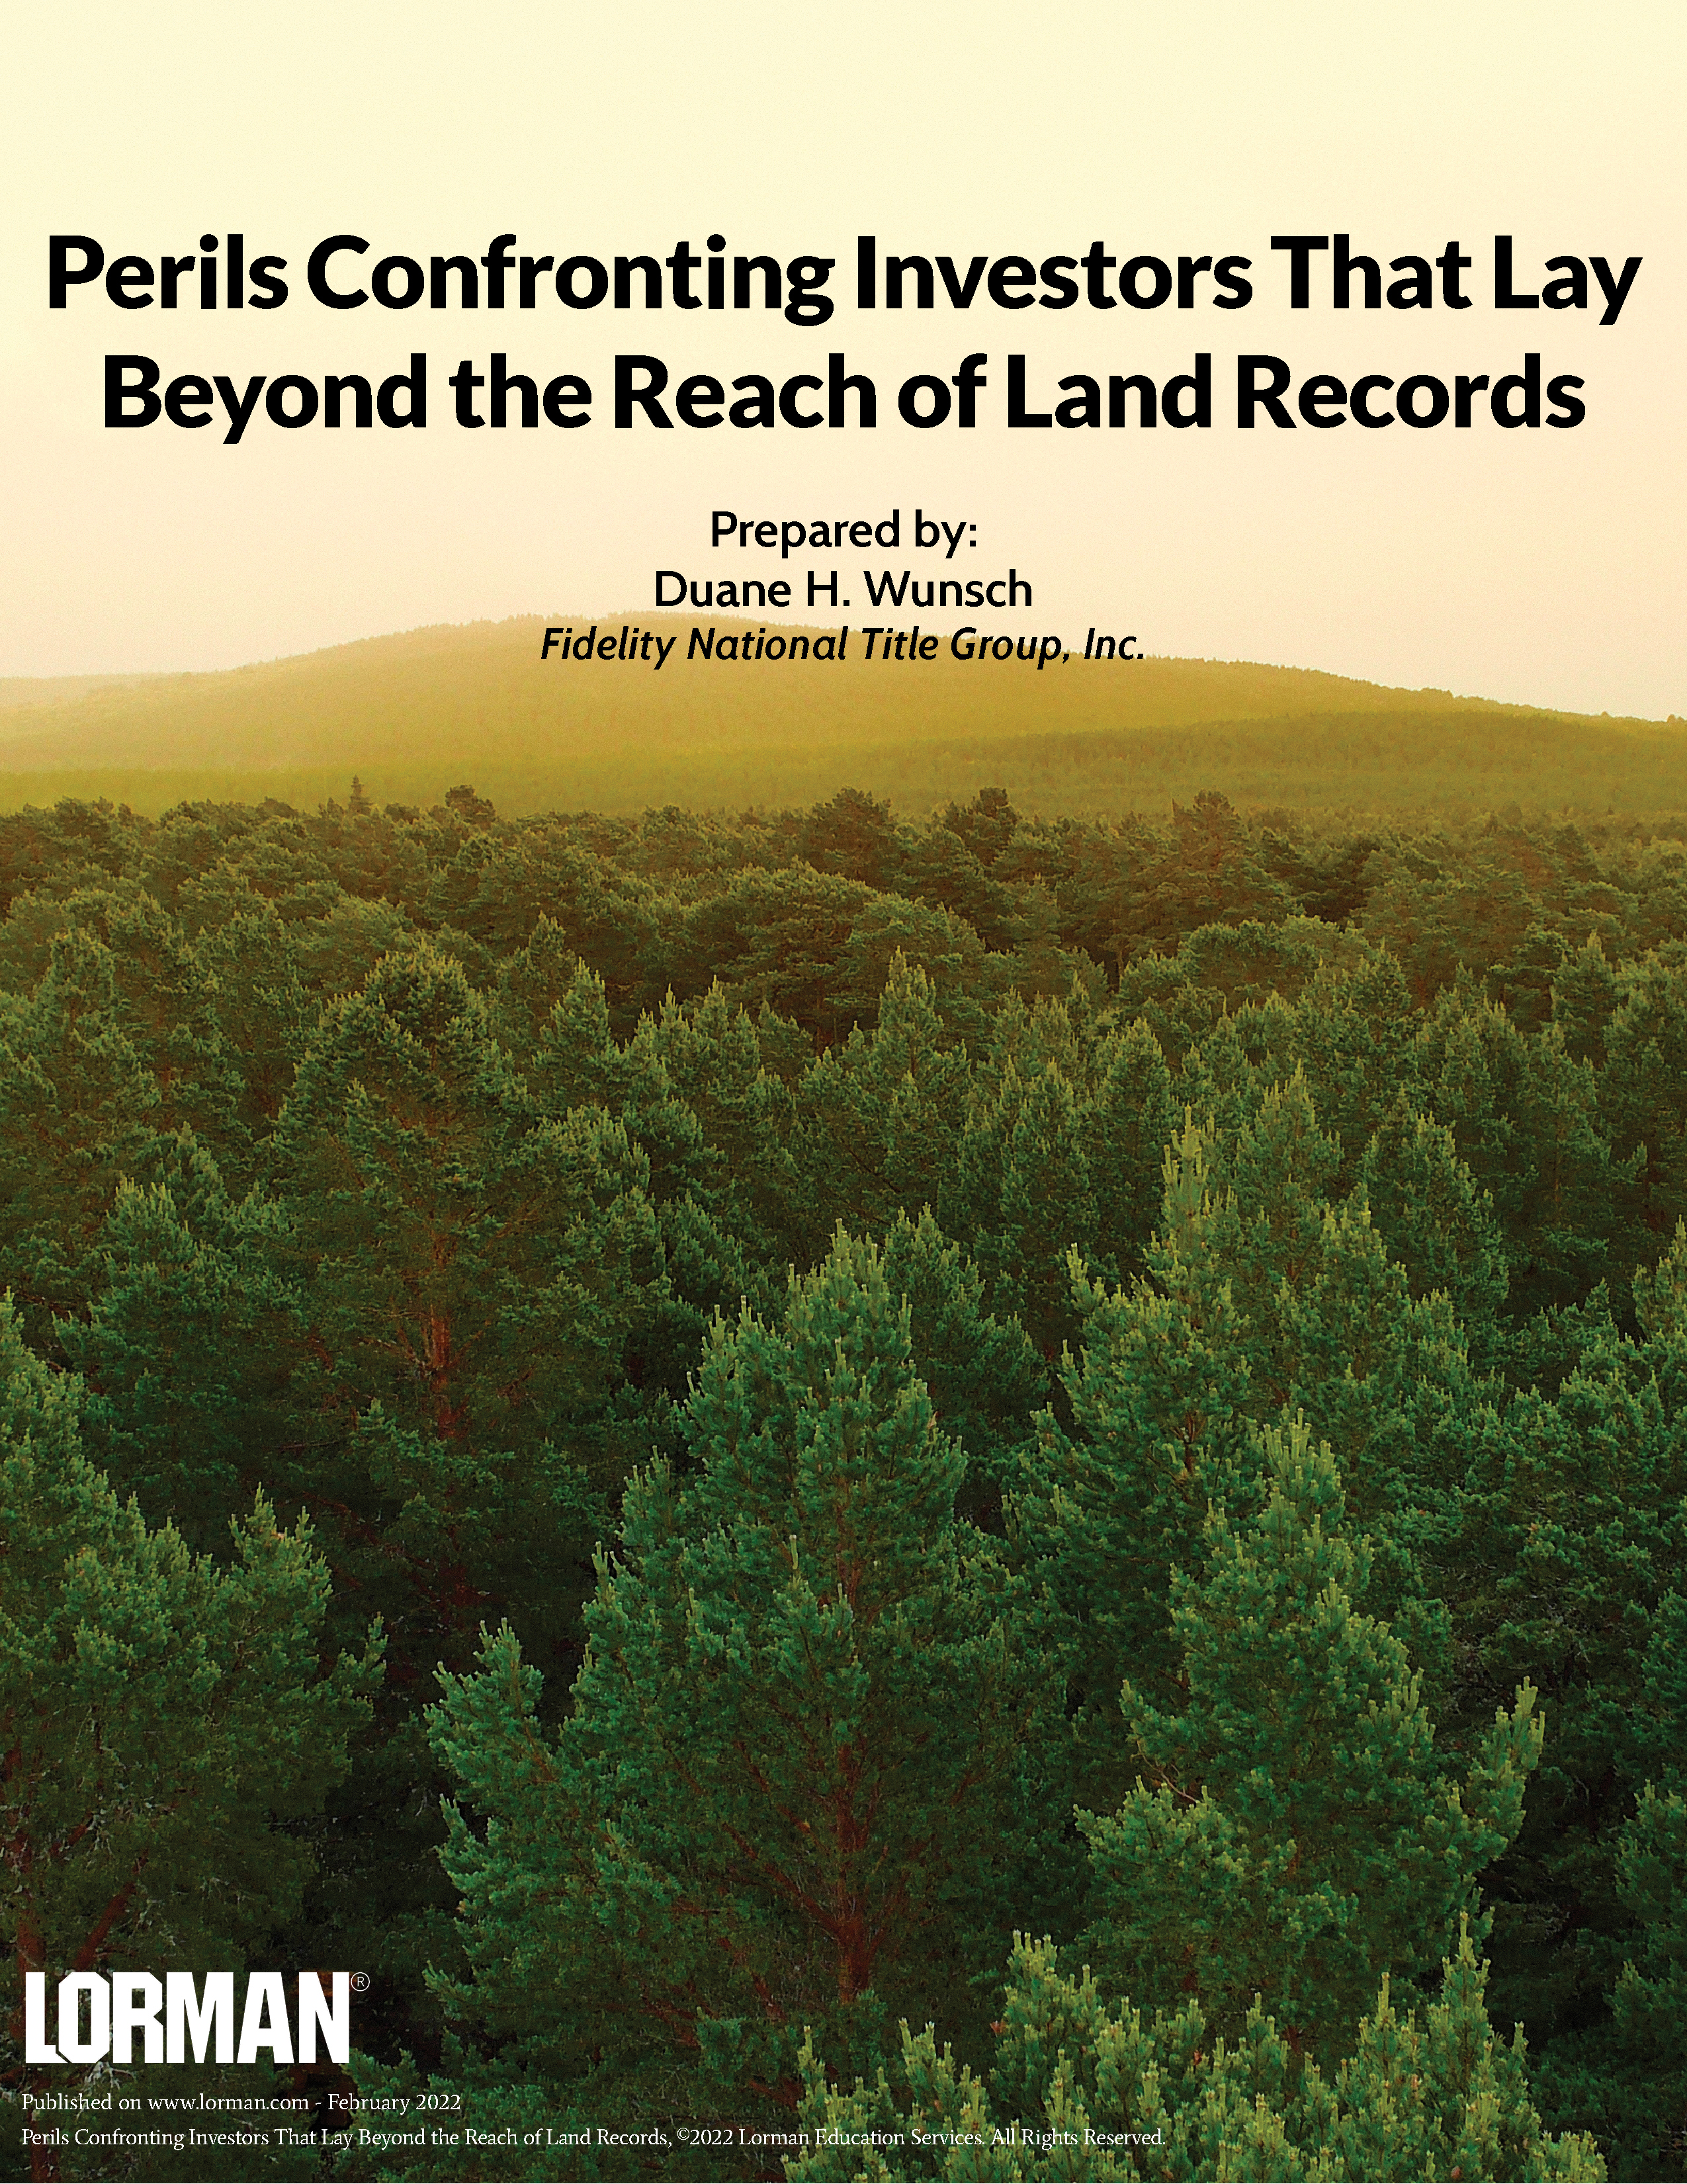 Perils Confronting Investors That Lay Beyond the Reach of Land Records